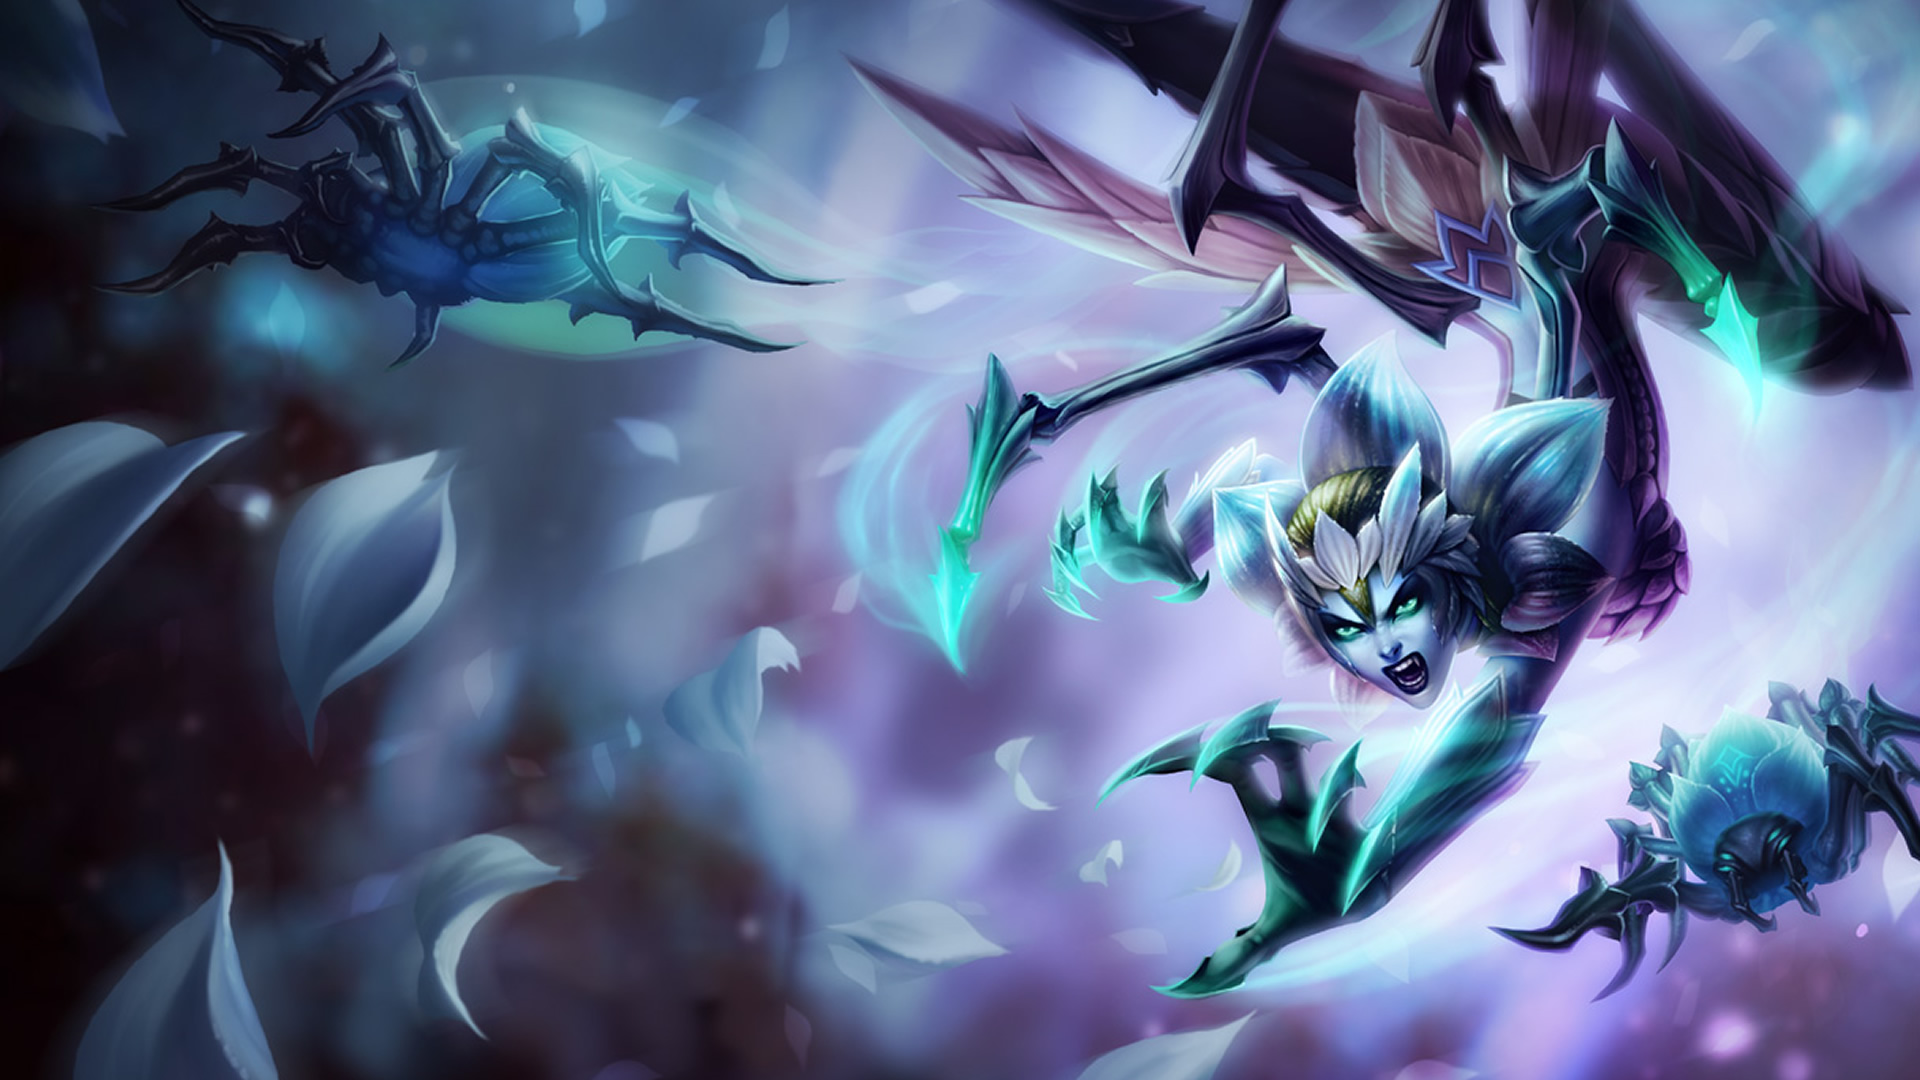 League of Legends Elise wallpaper Resolution 1920x1080 | Best Download this awesome wallpaper - Cool Wallpaper HD - CoolWallpaper-HD.com